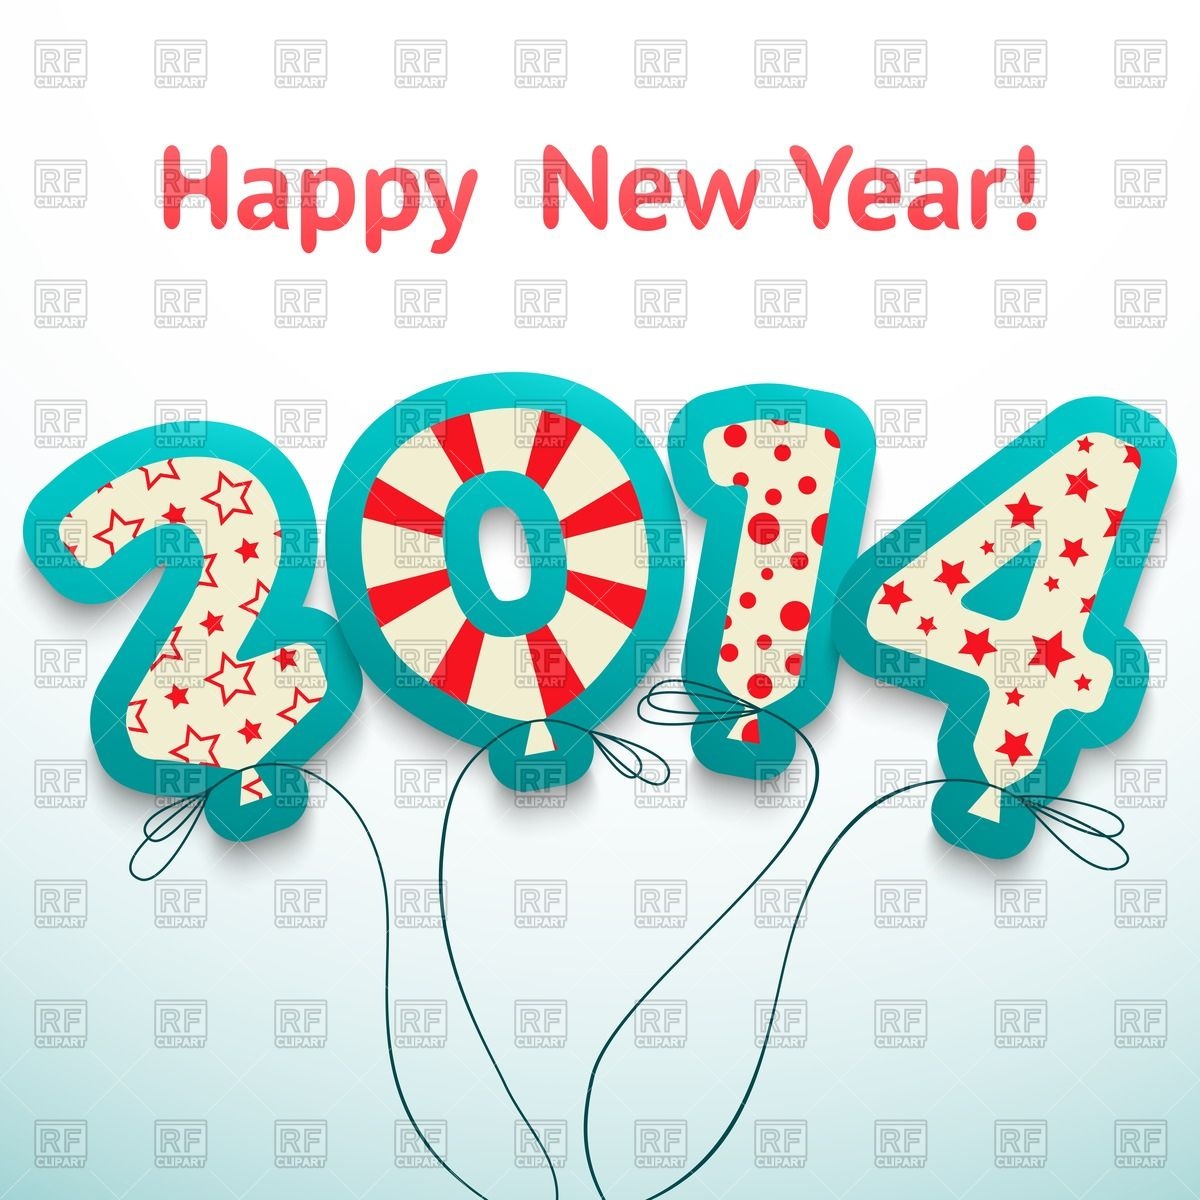 Happy New Year 2014   Greeting Card With Balloons Download Royalty    